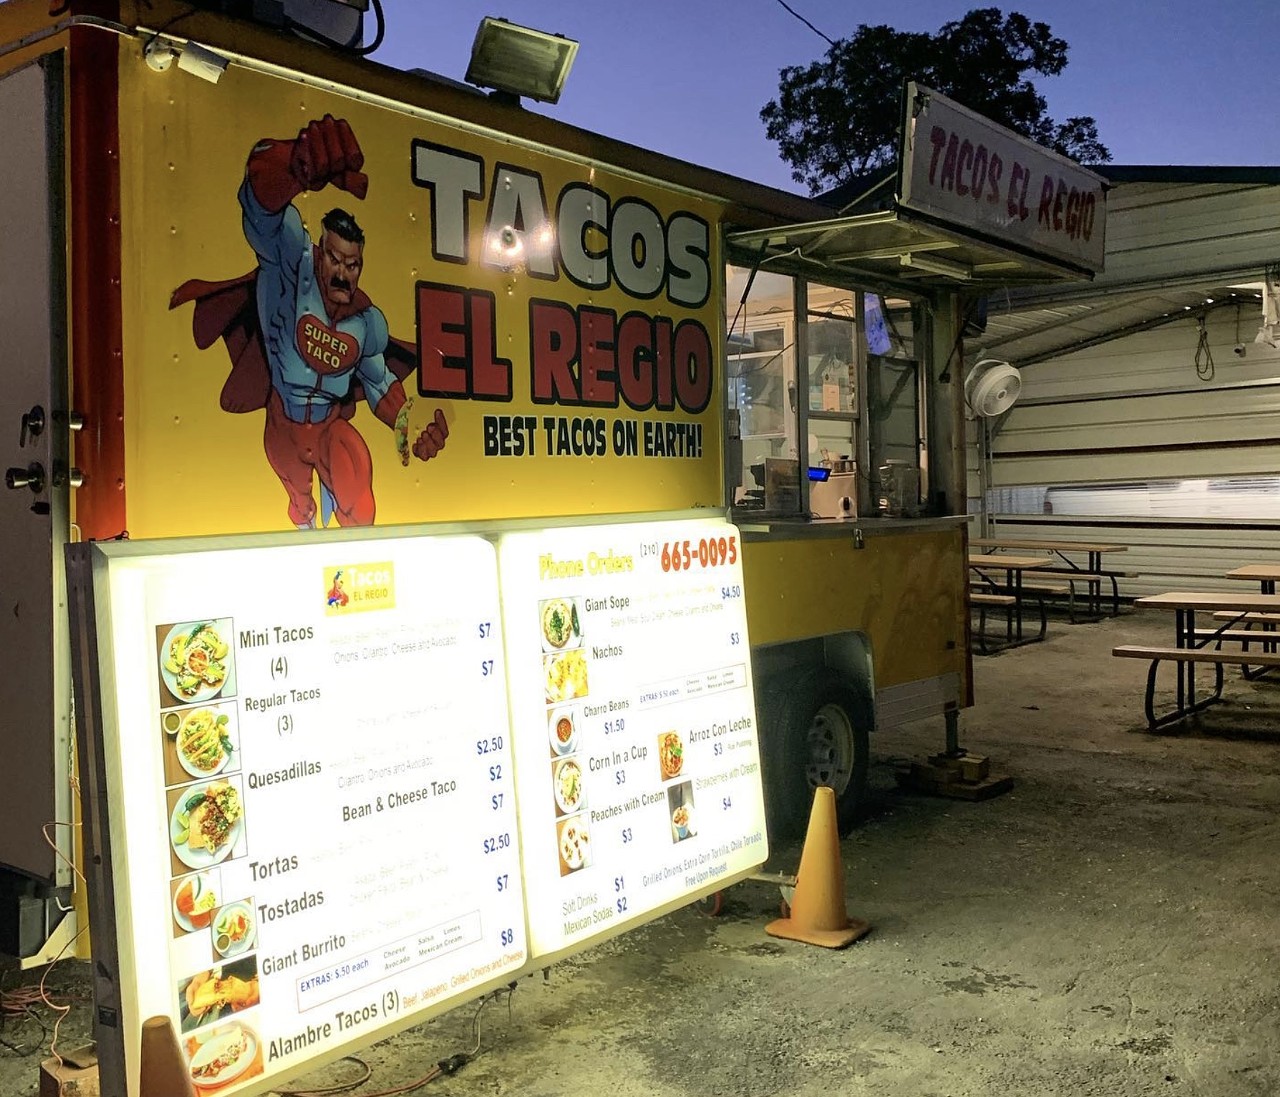 Tacos El Regio
Multiple Locations, tacos-el-regio-mexican-restaurant.business.site
This gem of a taco truck offers tasty mobile Mexican street food and simple yet delicious tacos. 
Photo via Instagram /  tacoselregiotx